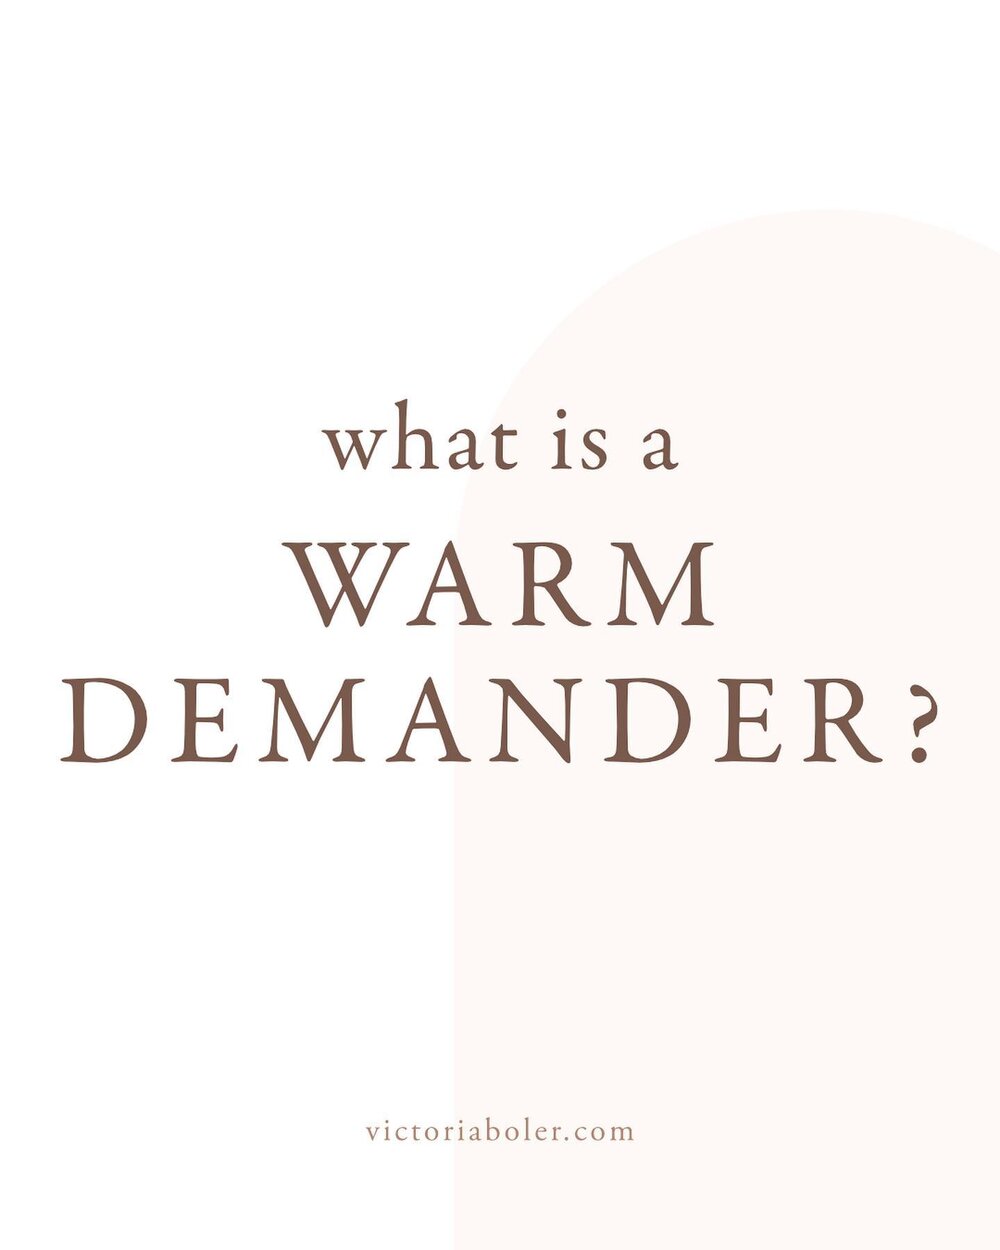 Are you familiar with this term? 

I love the imagery of this teacher demeanor - caring, supportive, and nurturing, while holding high expectations. 

There&rsquo;s a lot of really excellent literature to dive into around warm demanders. A few studie